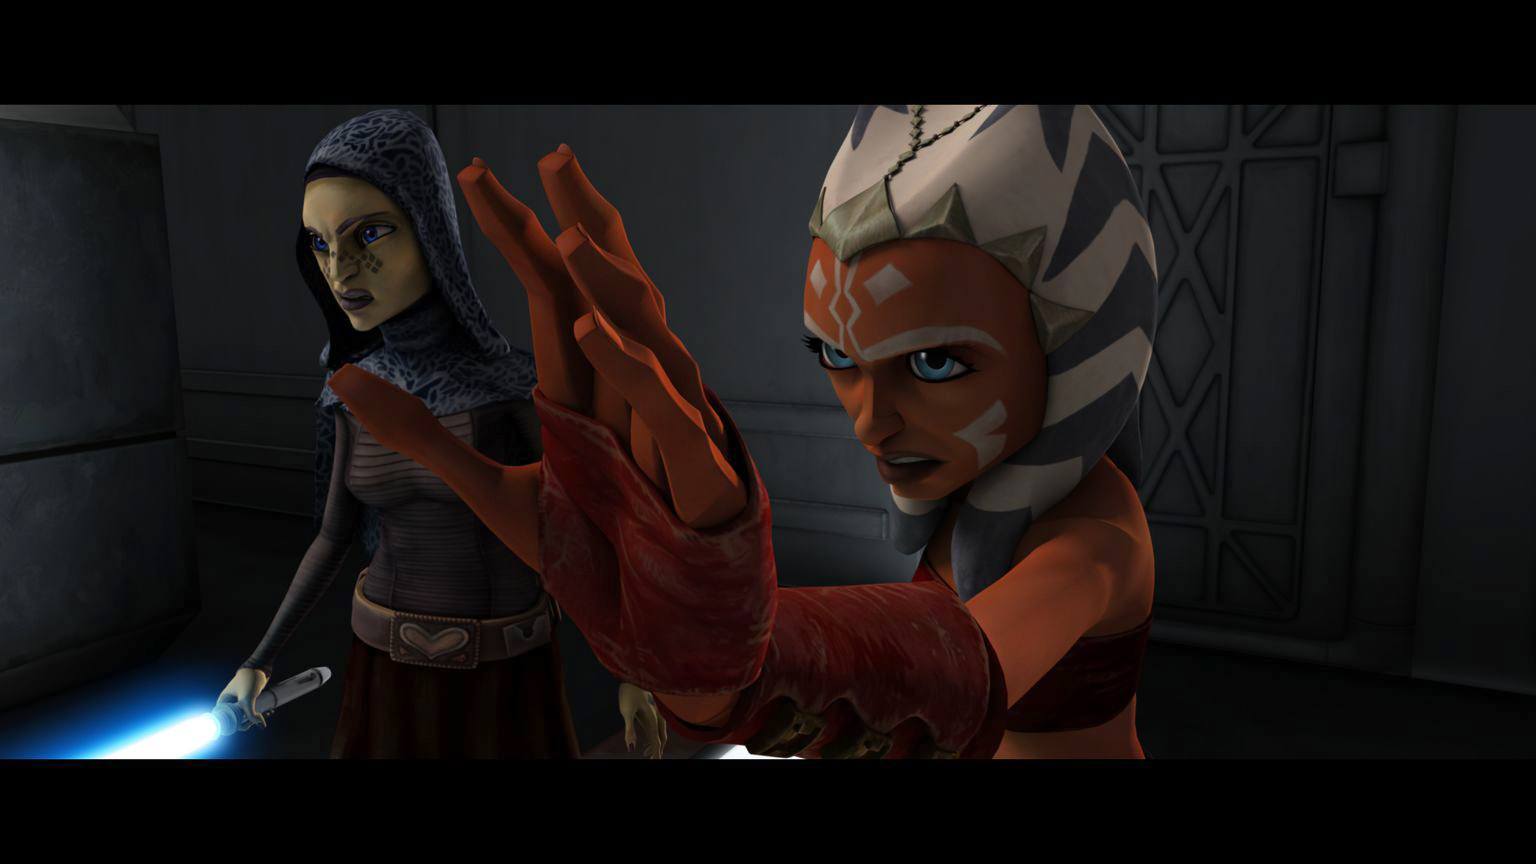 Ahsoka Tano faces a deadly threat in the form of mind-controlled clones in “Brain Invaders,” an all-new episode of STAR WARS: THE CLONE WARS premiering at 9:00 p.m. ET/PT Friday, December 4 on Cartoon Network. TM & © 2009 Lucasfilm Ltd. All rights reserved. 